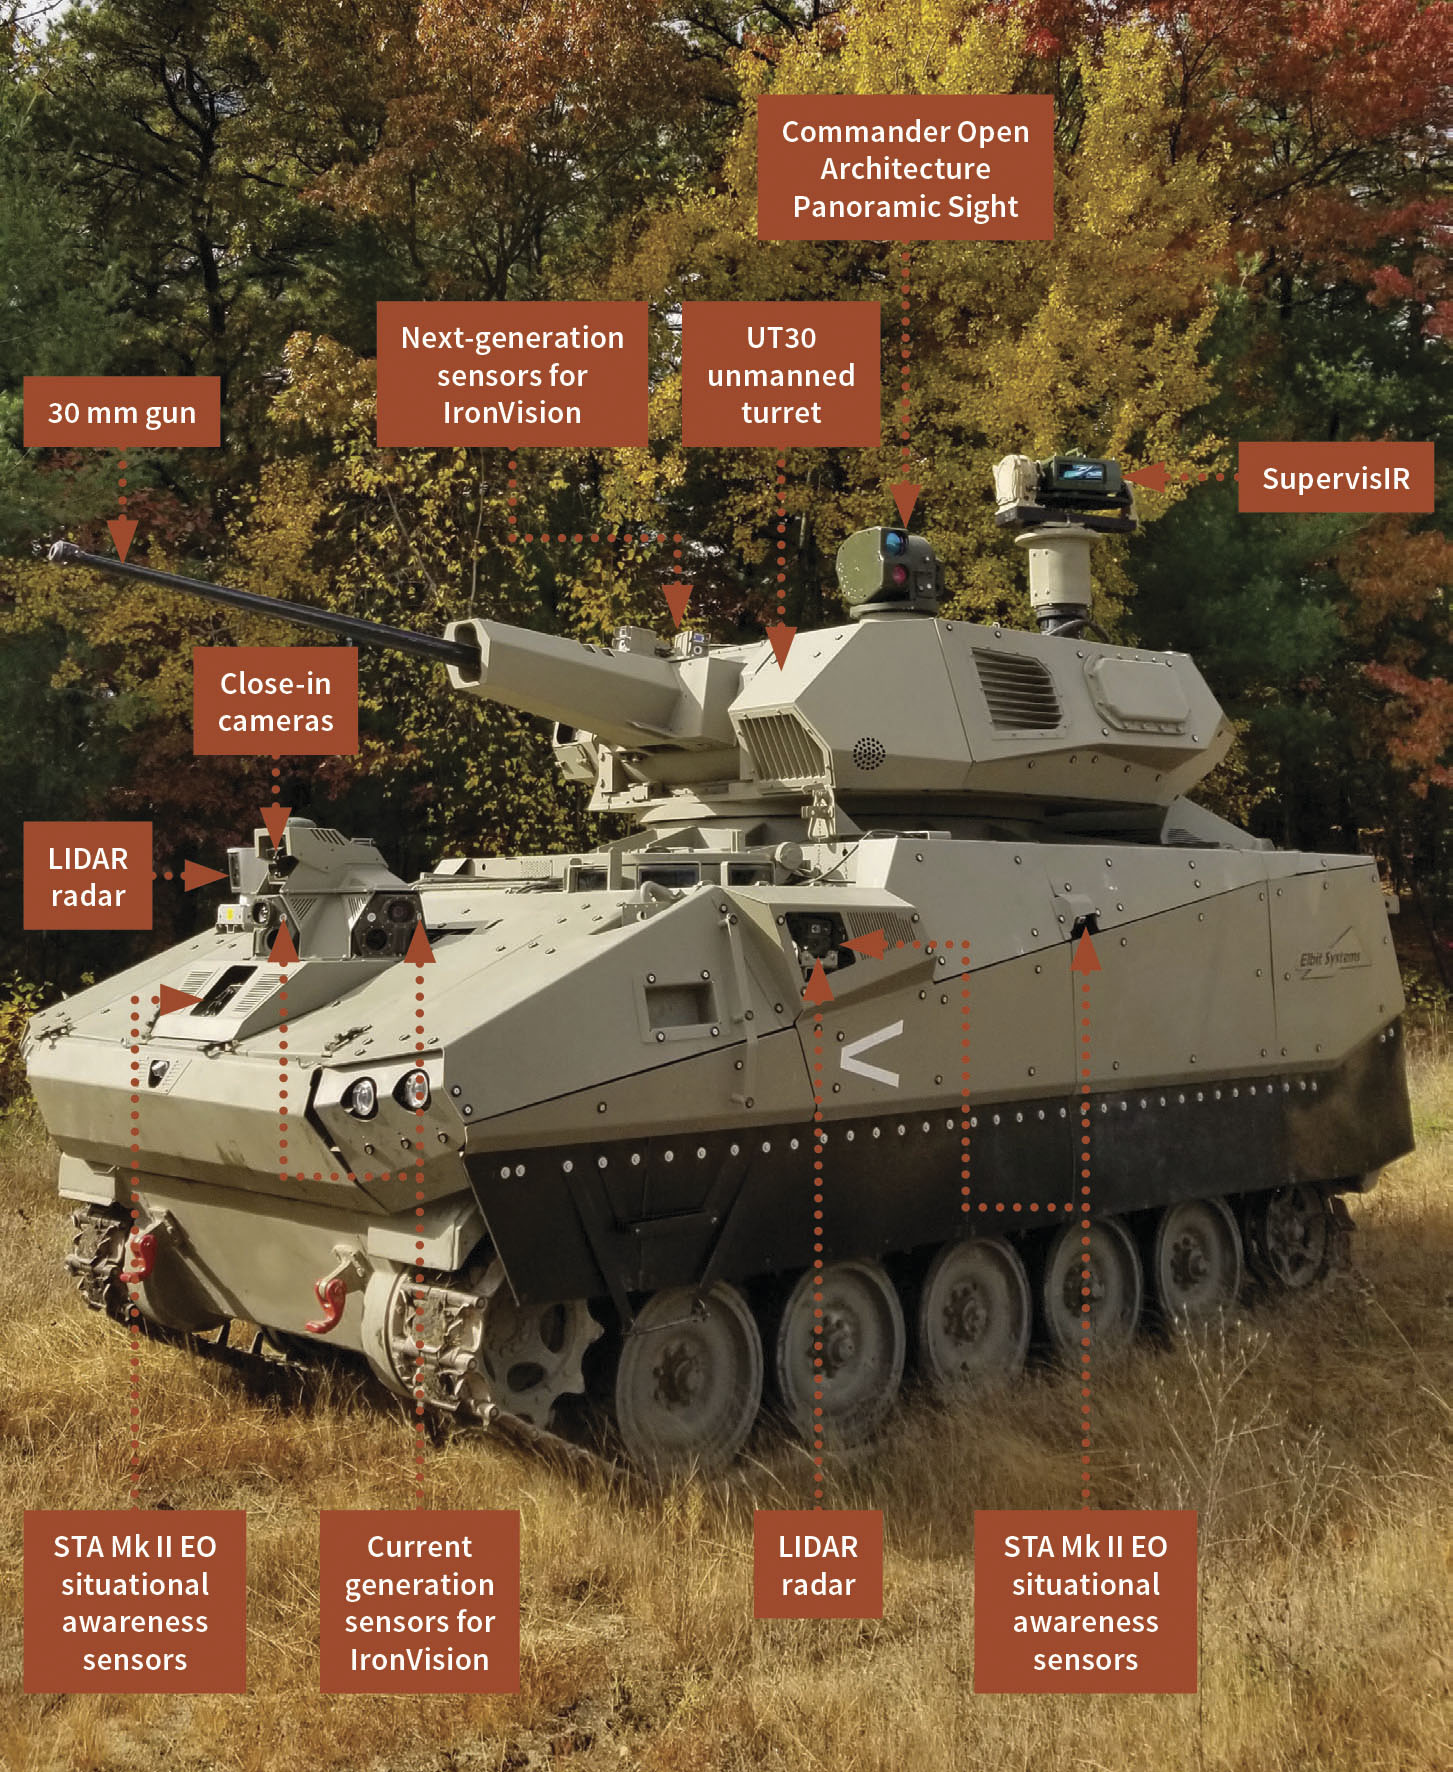 In 2019, Elbit Systems demonstrated a Future Fighting Vehicle Demonstrator that was an M113 armoured personnel carrier (APC) integrated with a host of its technologies designed to reduce manpower on combat vehicles. (Elbit Systems)